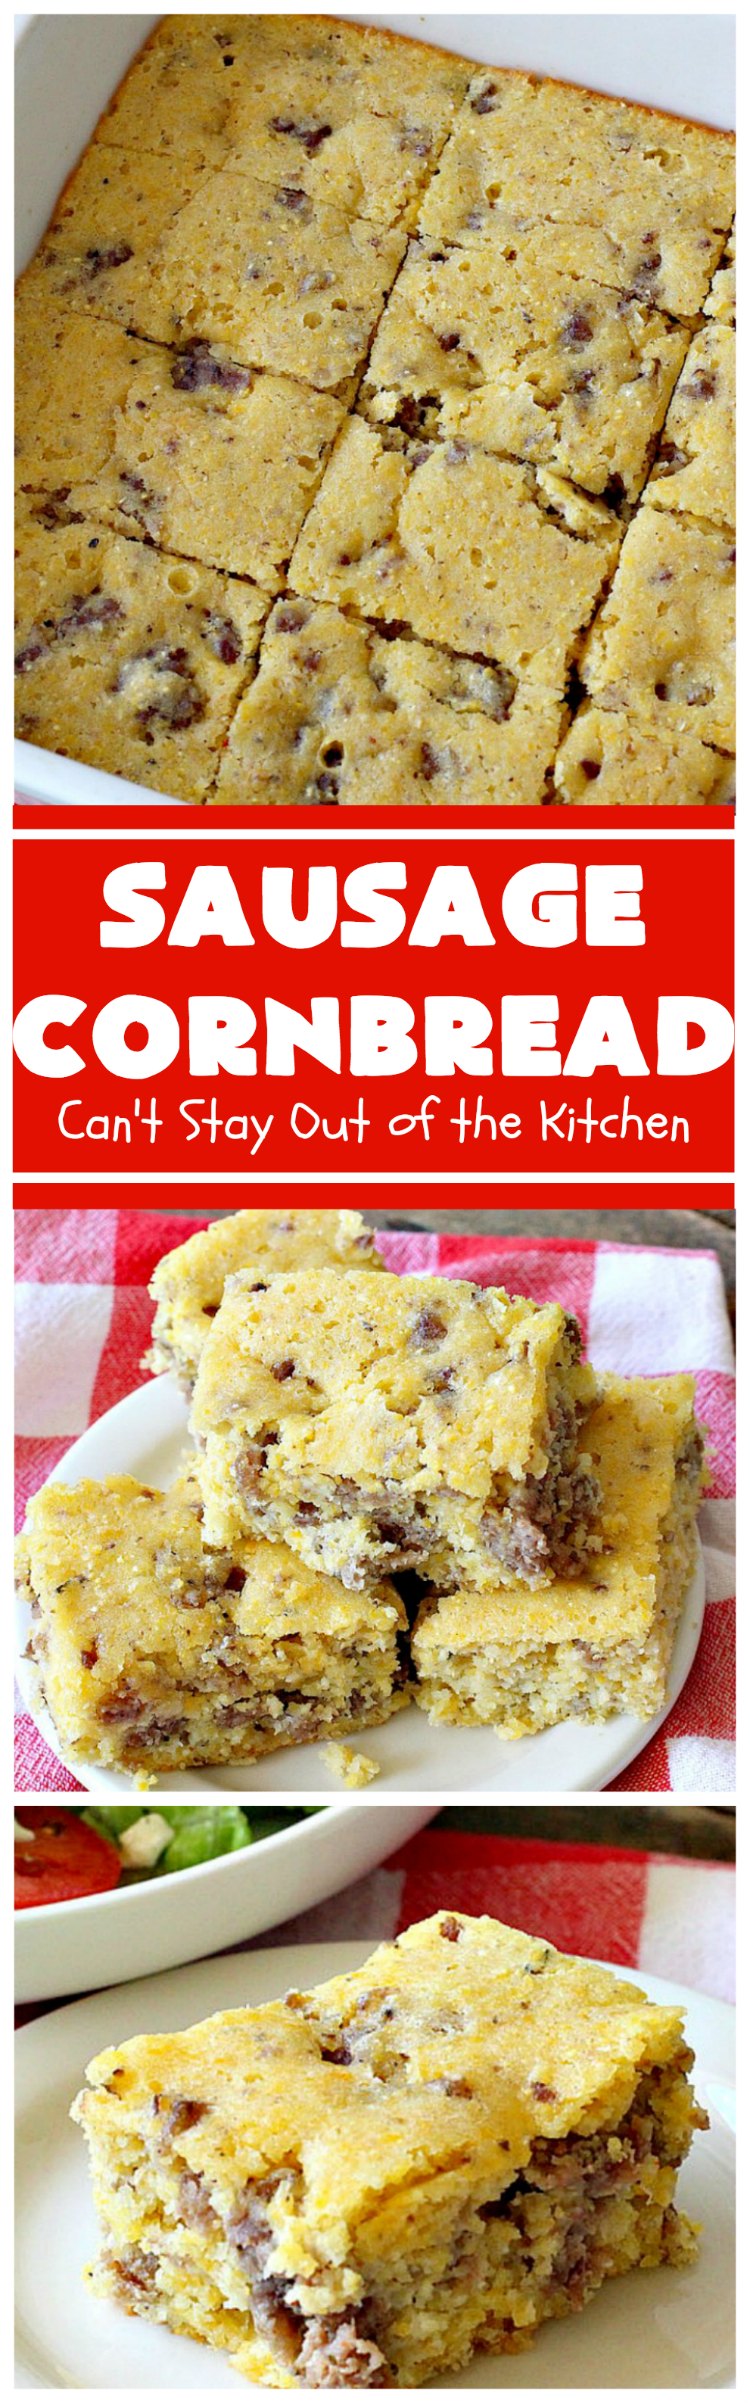 Sausage Cornbread | Can't Stay Out of the Kitchen